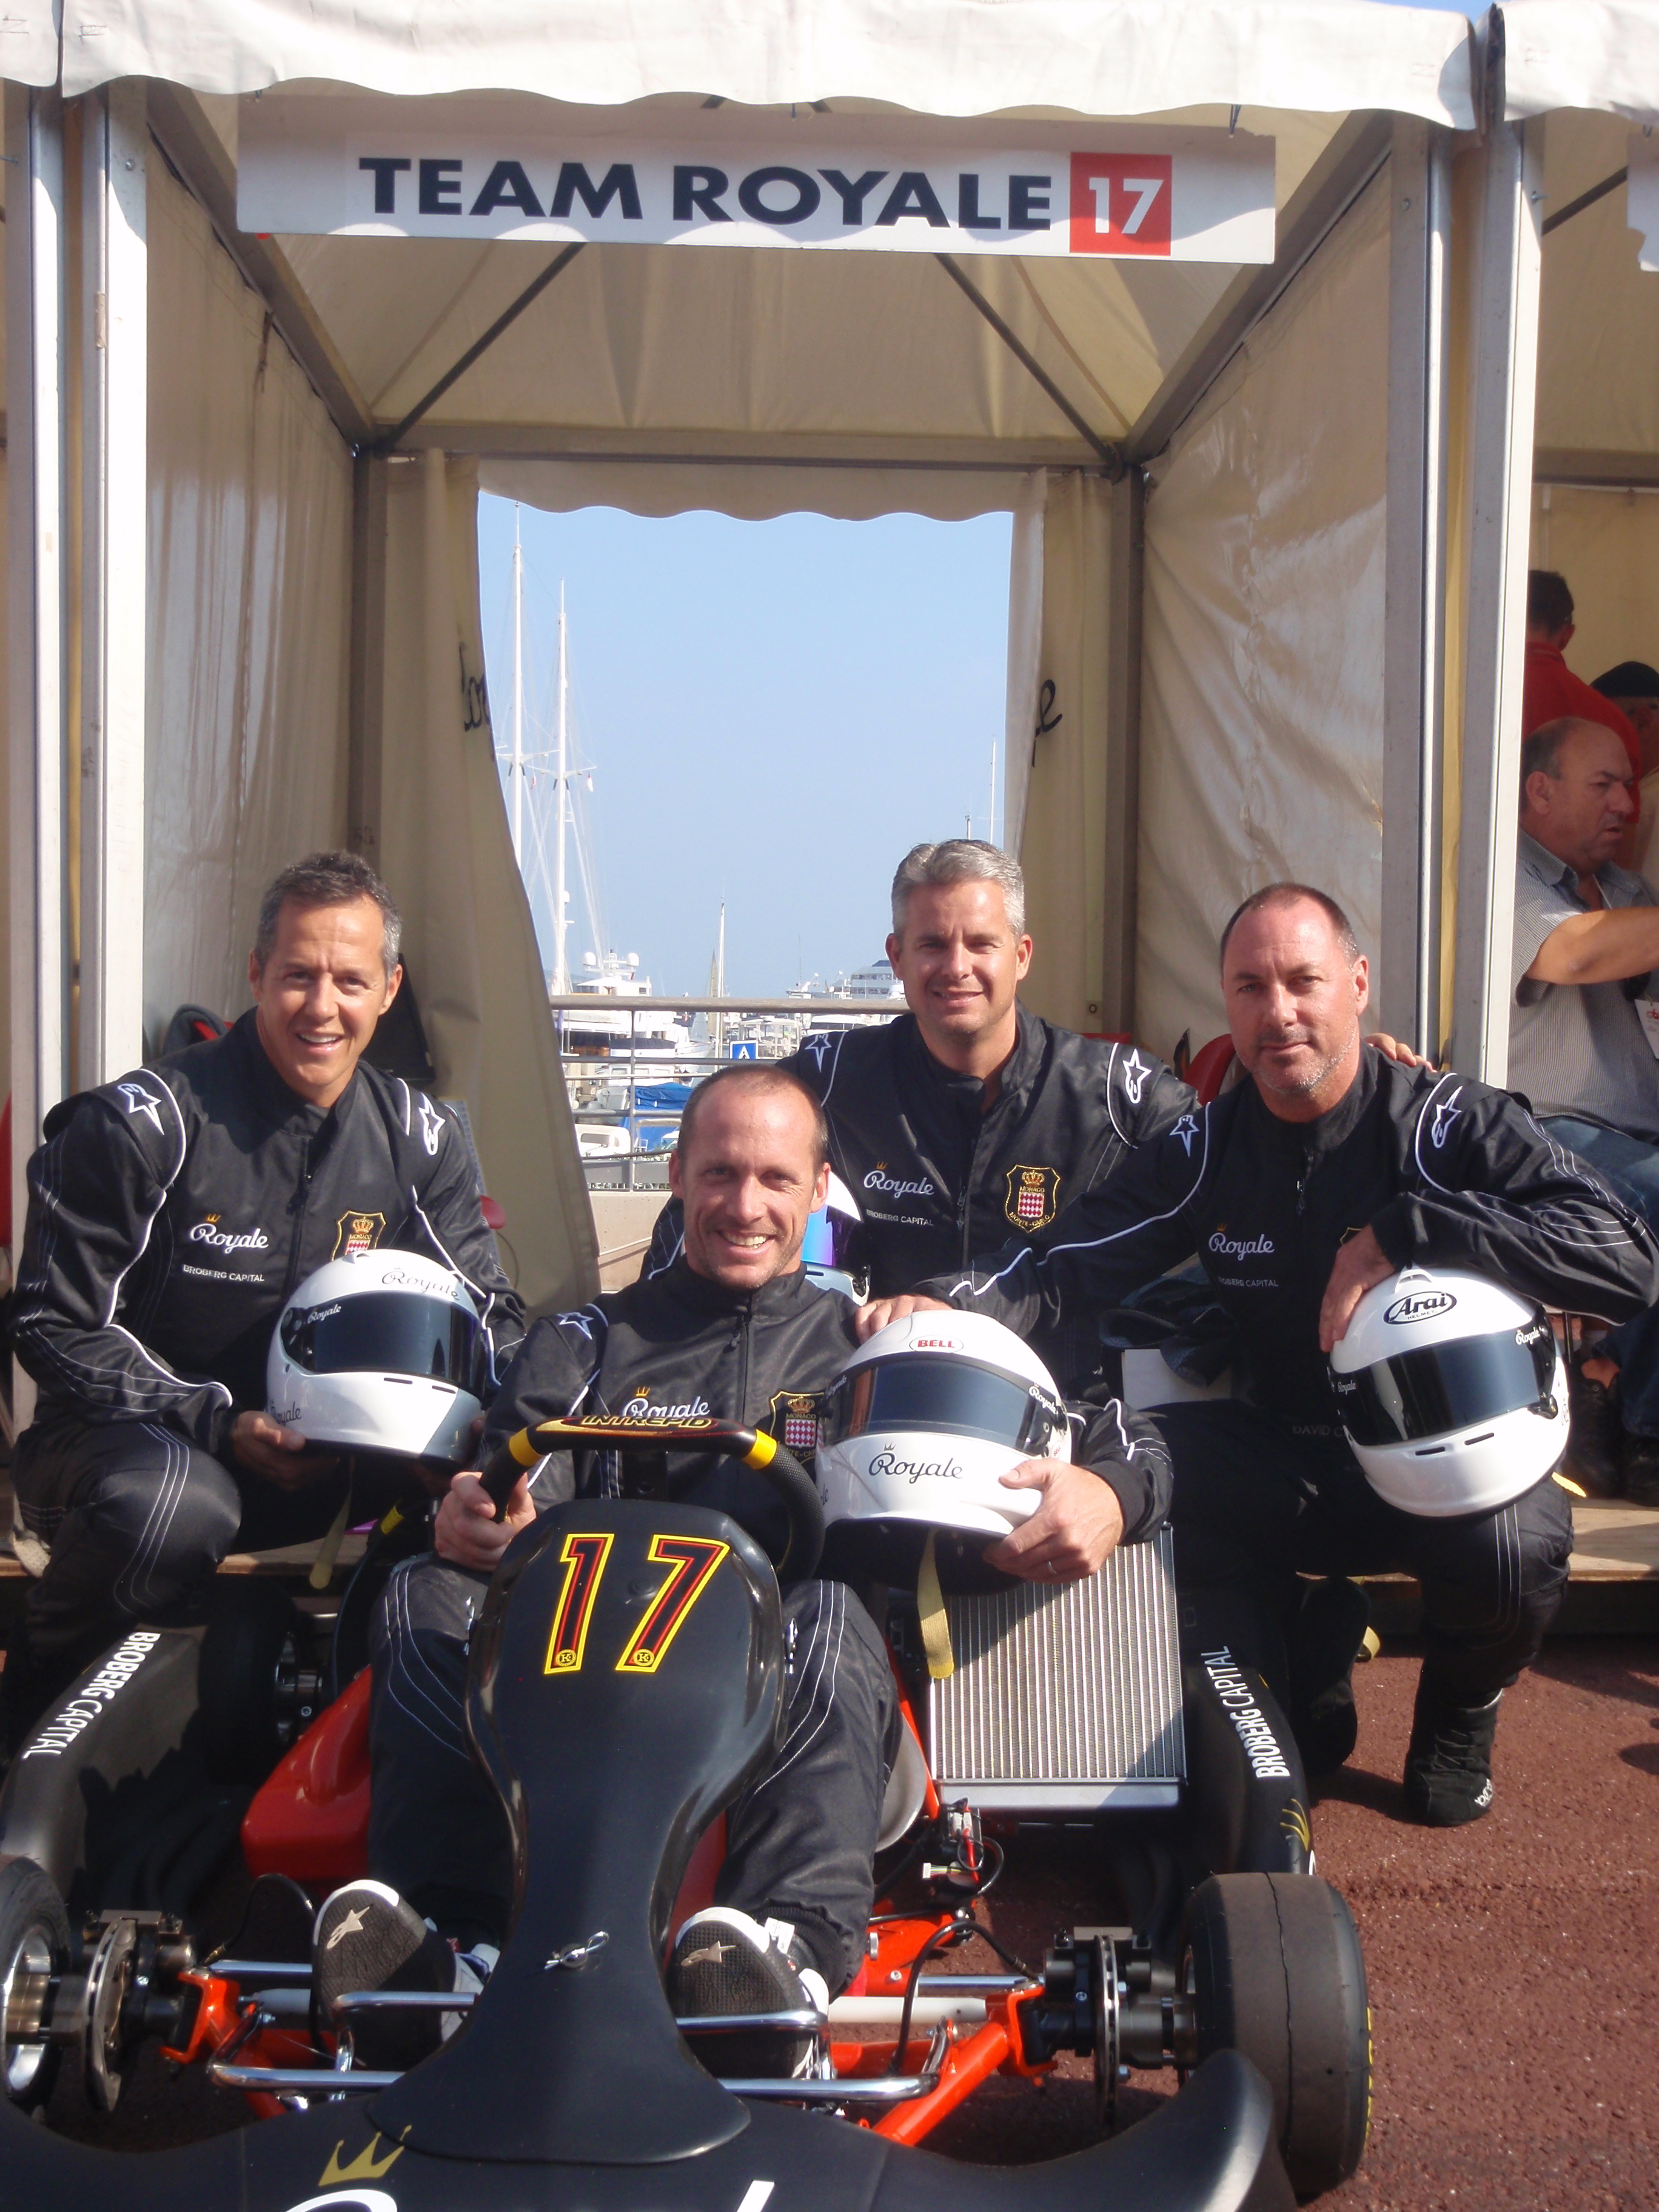 Monaco Kart Cup 6 Hour for Team Royale